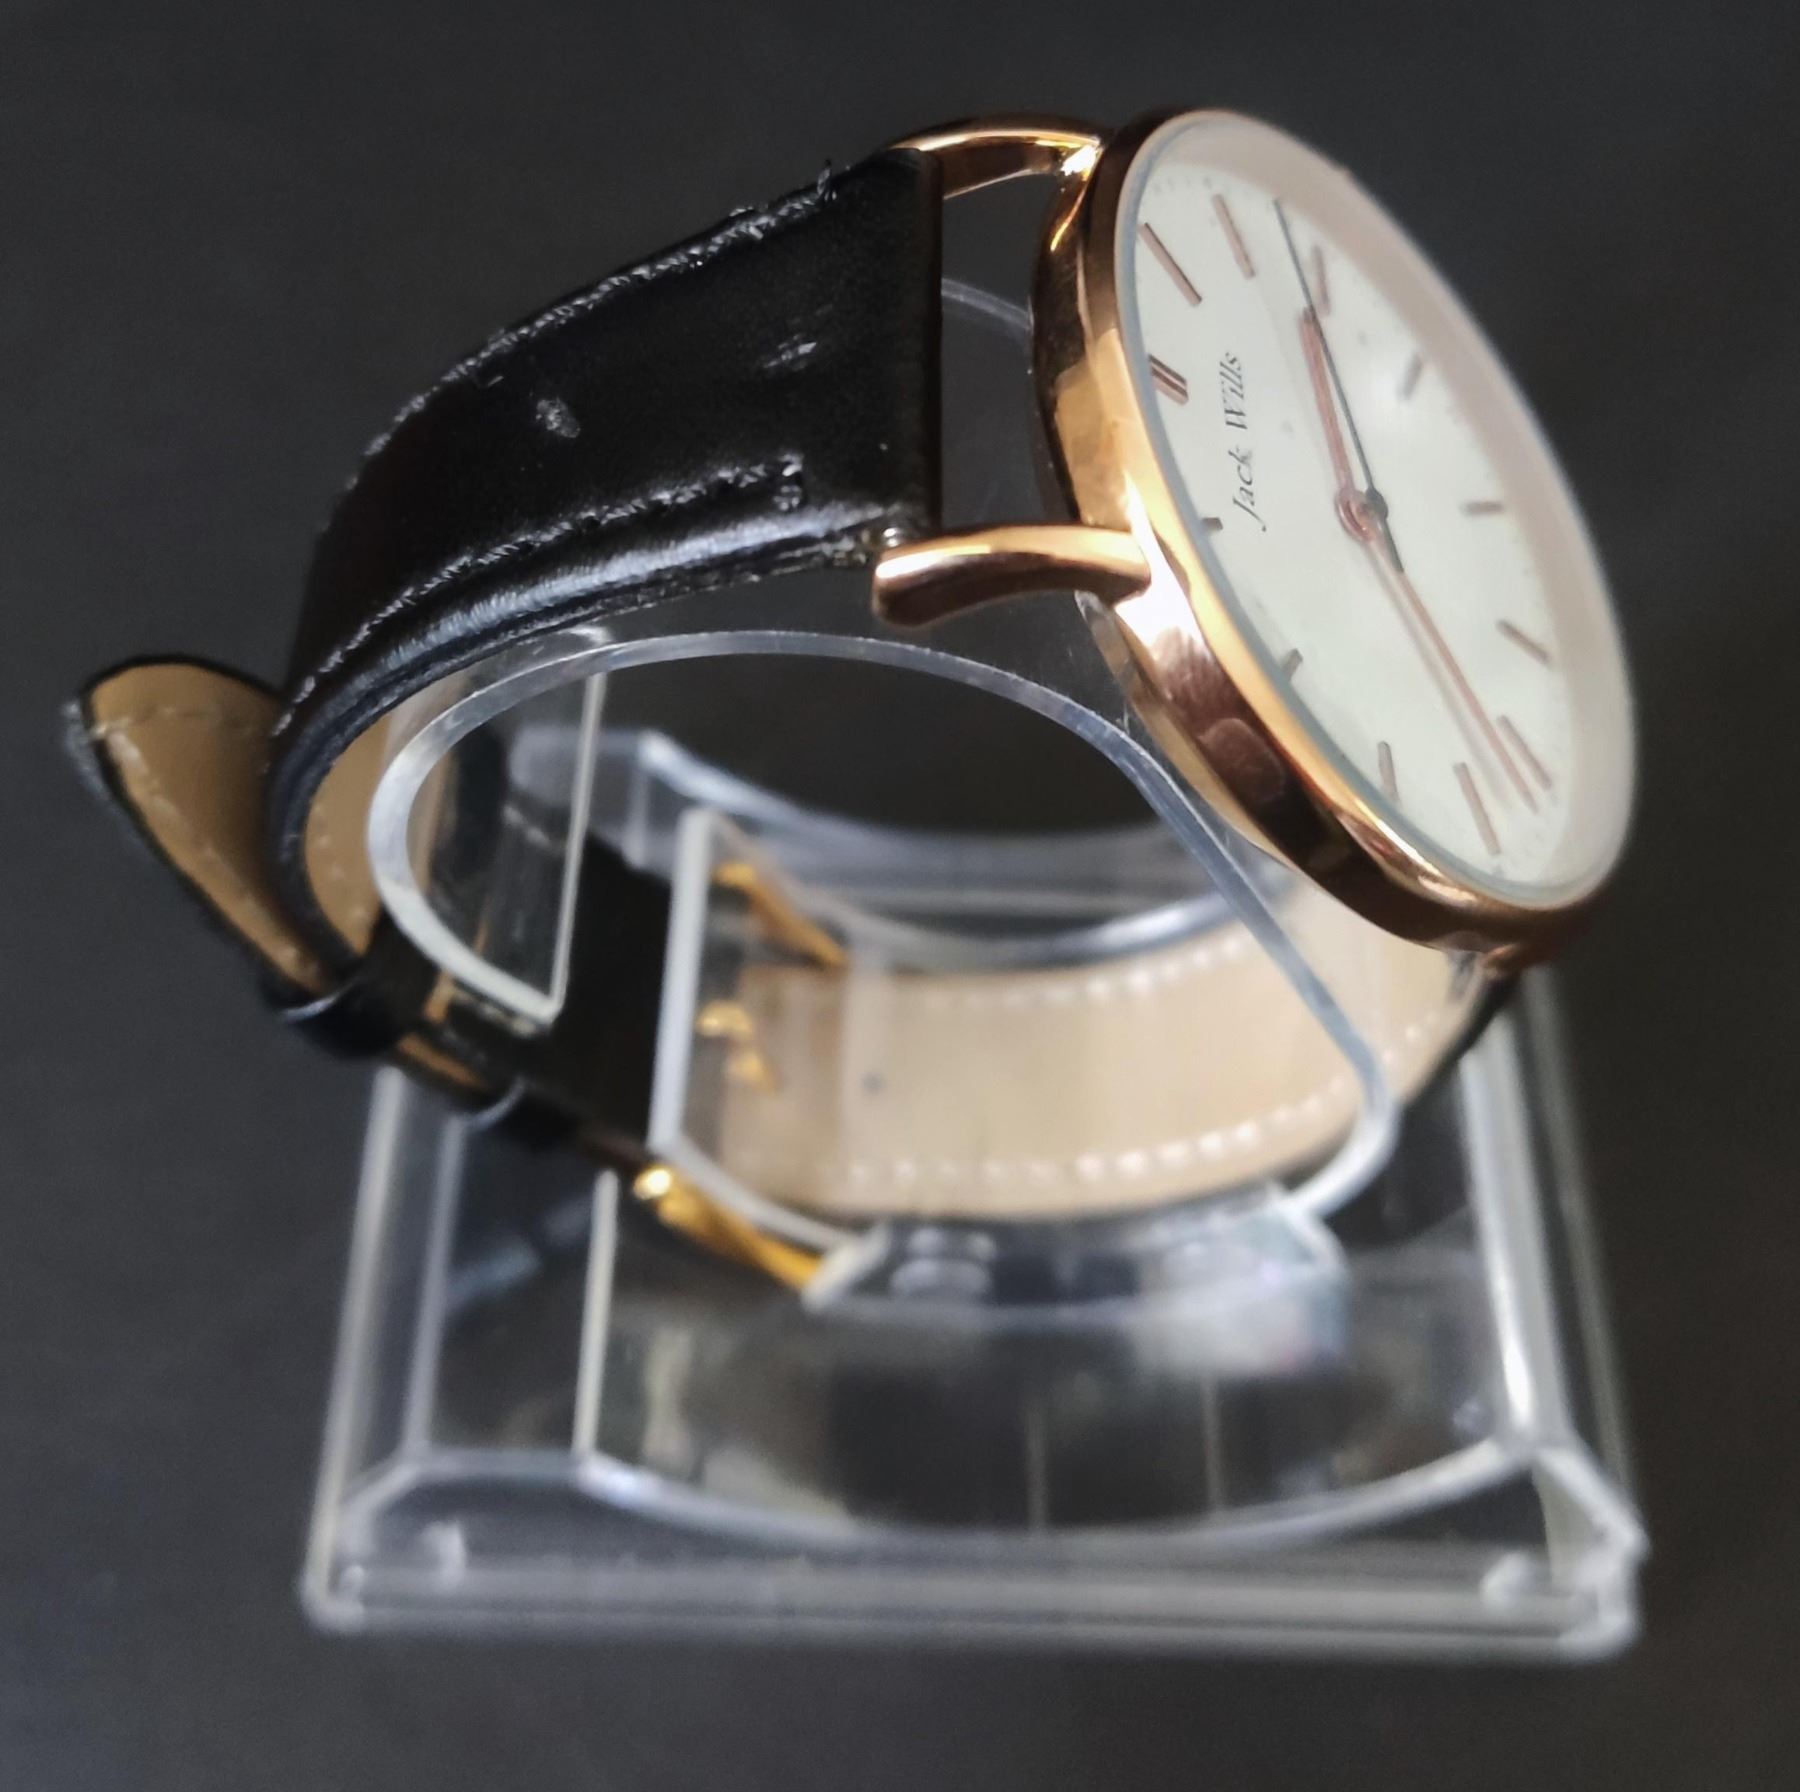 Brand new Jack Wills rose gold plated watch (JW018FLWH) With black Leather strap. Battery included. - Image 3 of 5